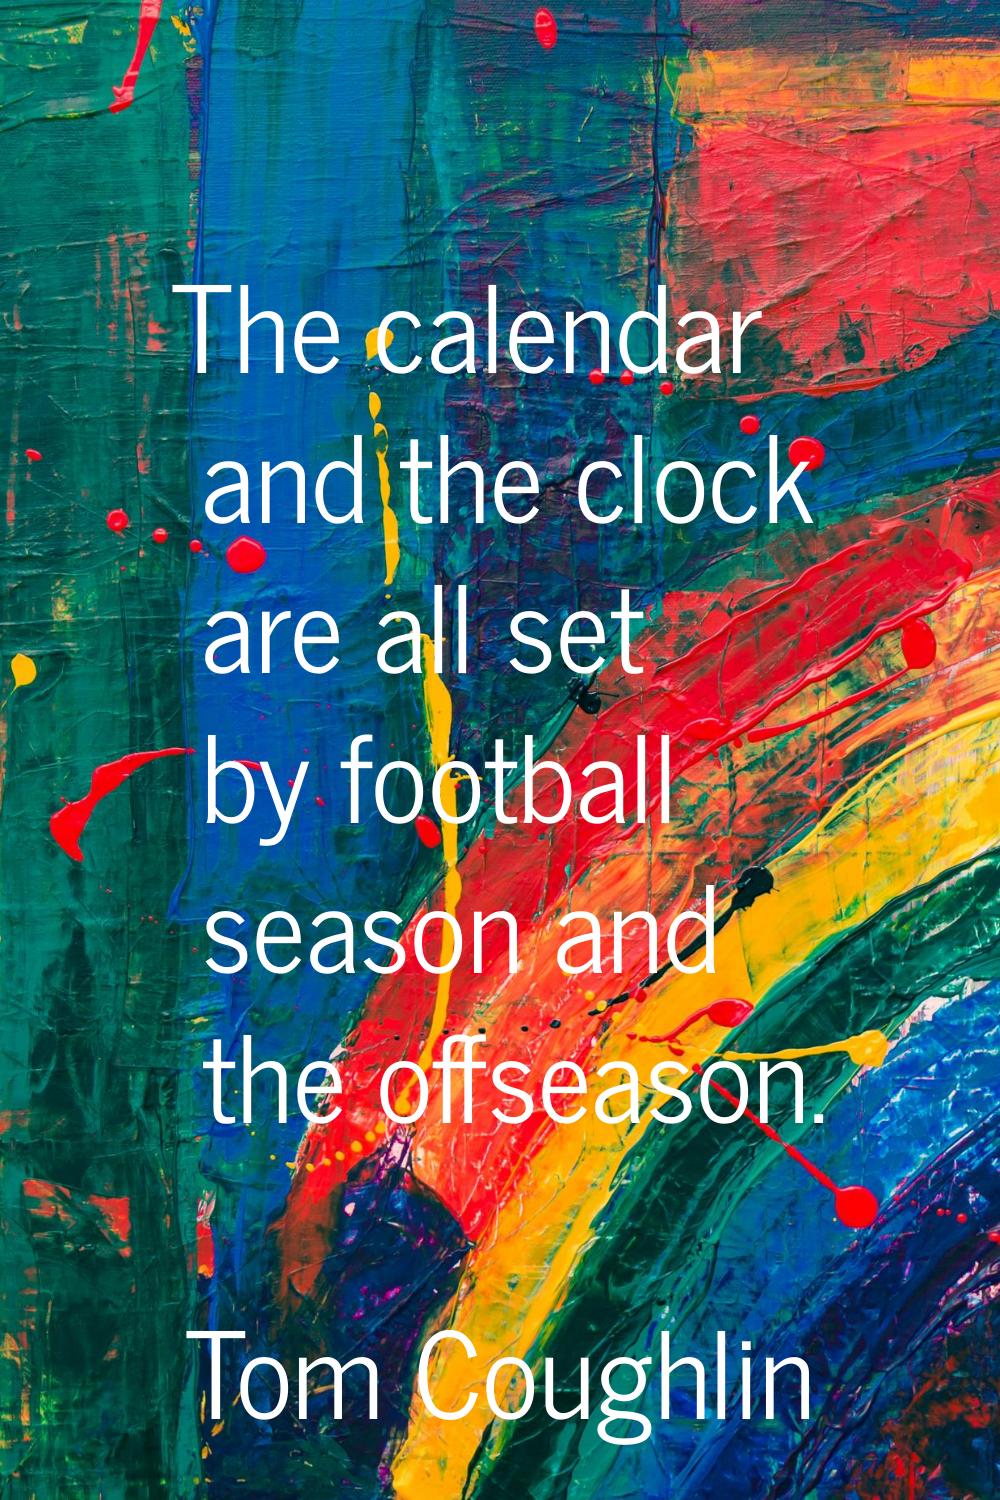 The calendar and the clock are all set by football season and the offseason.